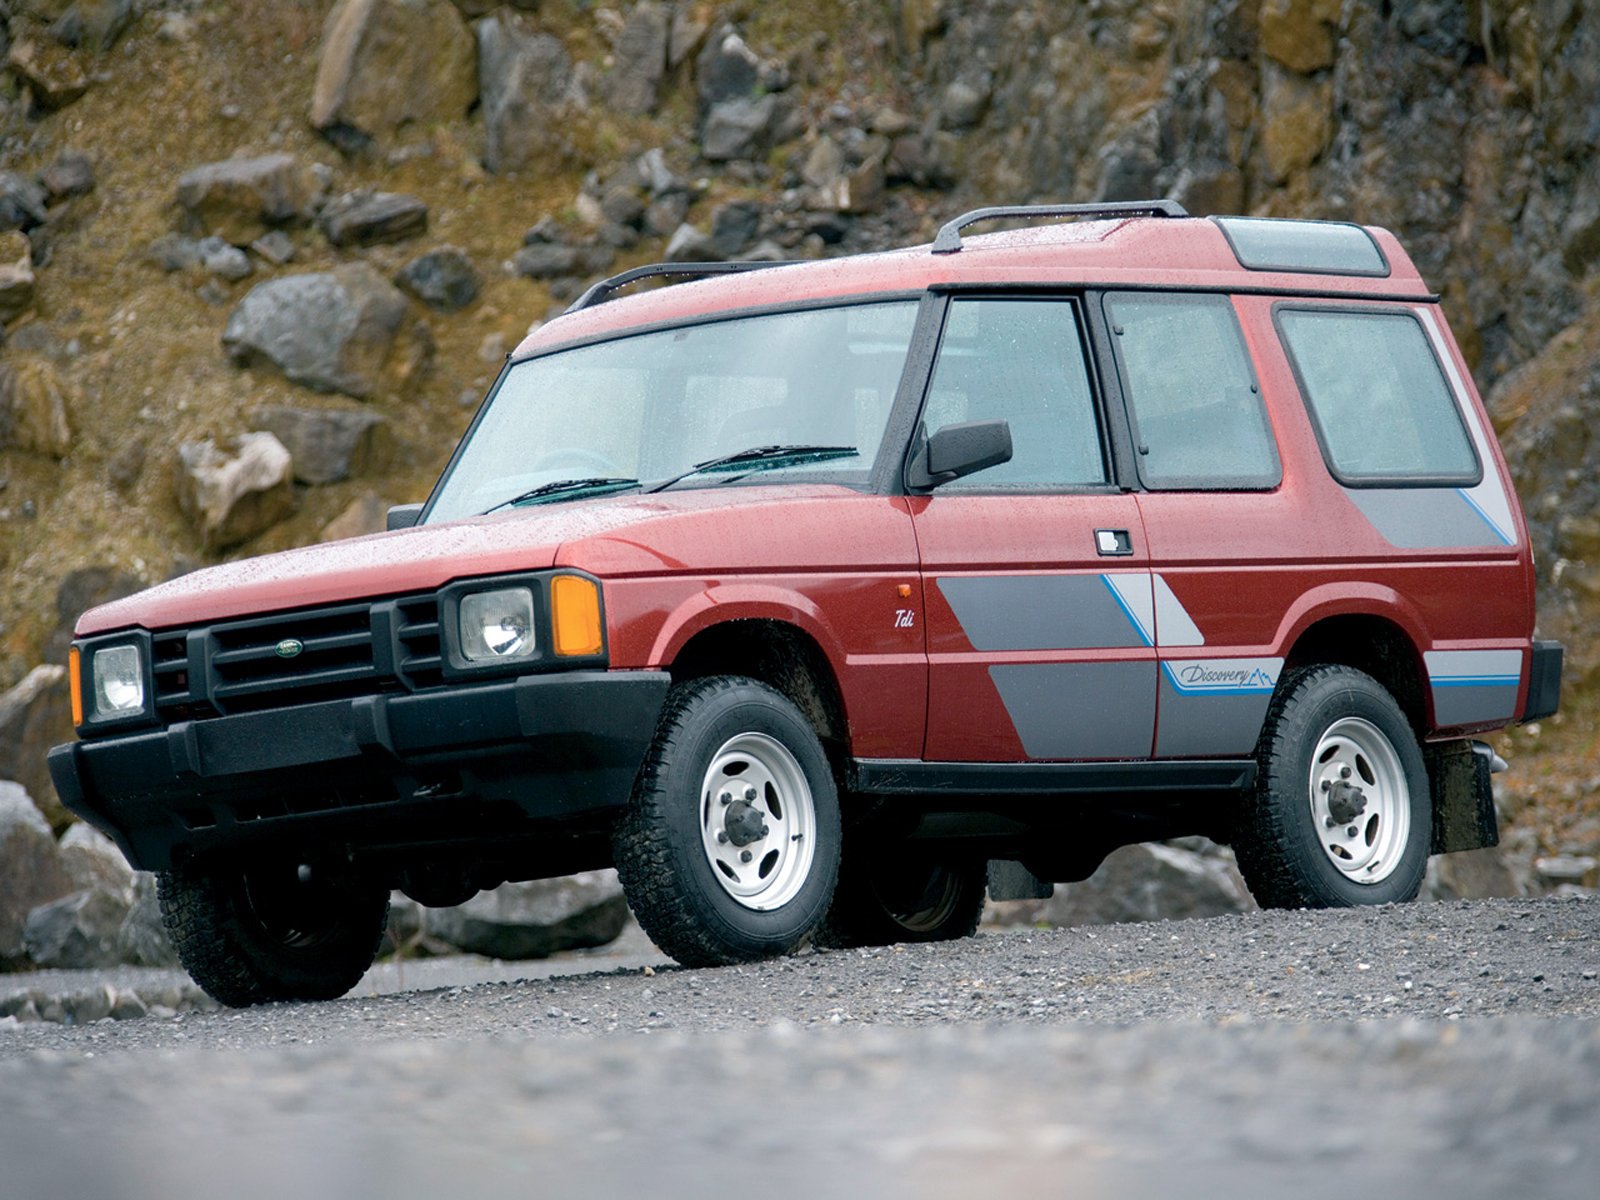 First discovery. Ленд Ровер Дискавери 1. Ленд Ровер Дискавери 1989. Land Rover Discovery 1 1989. Land Rover Discovery 2 1990.